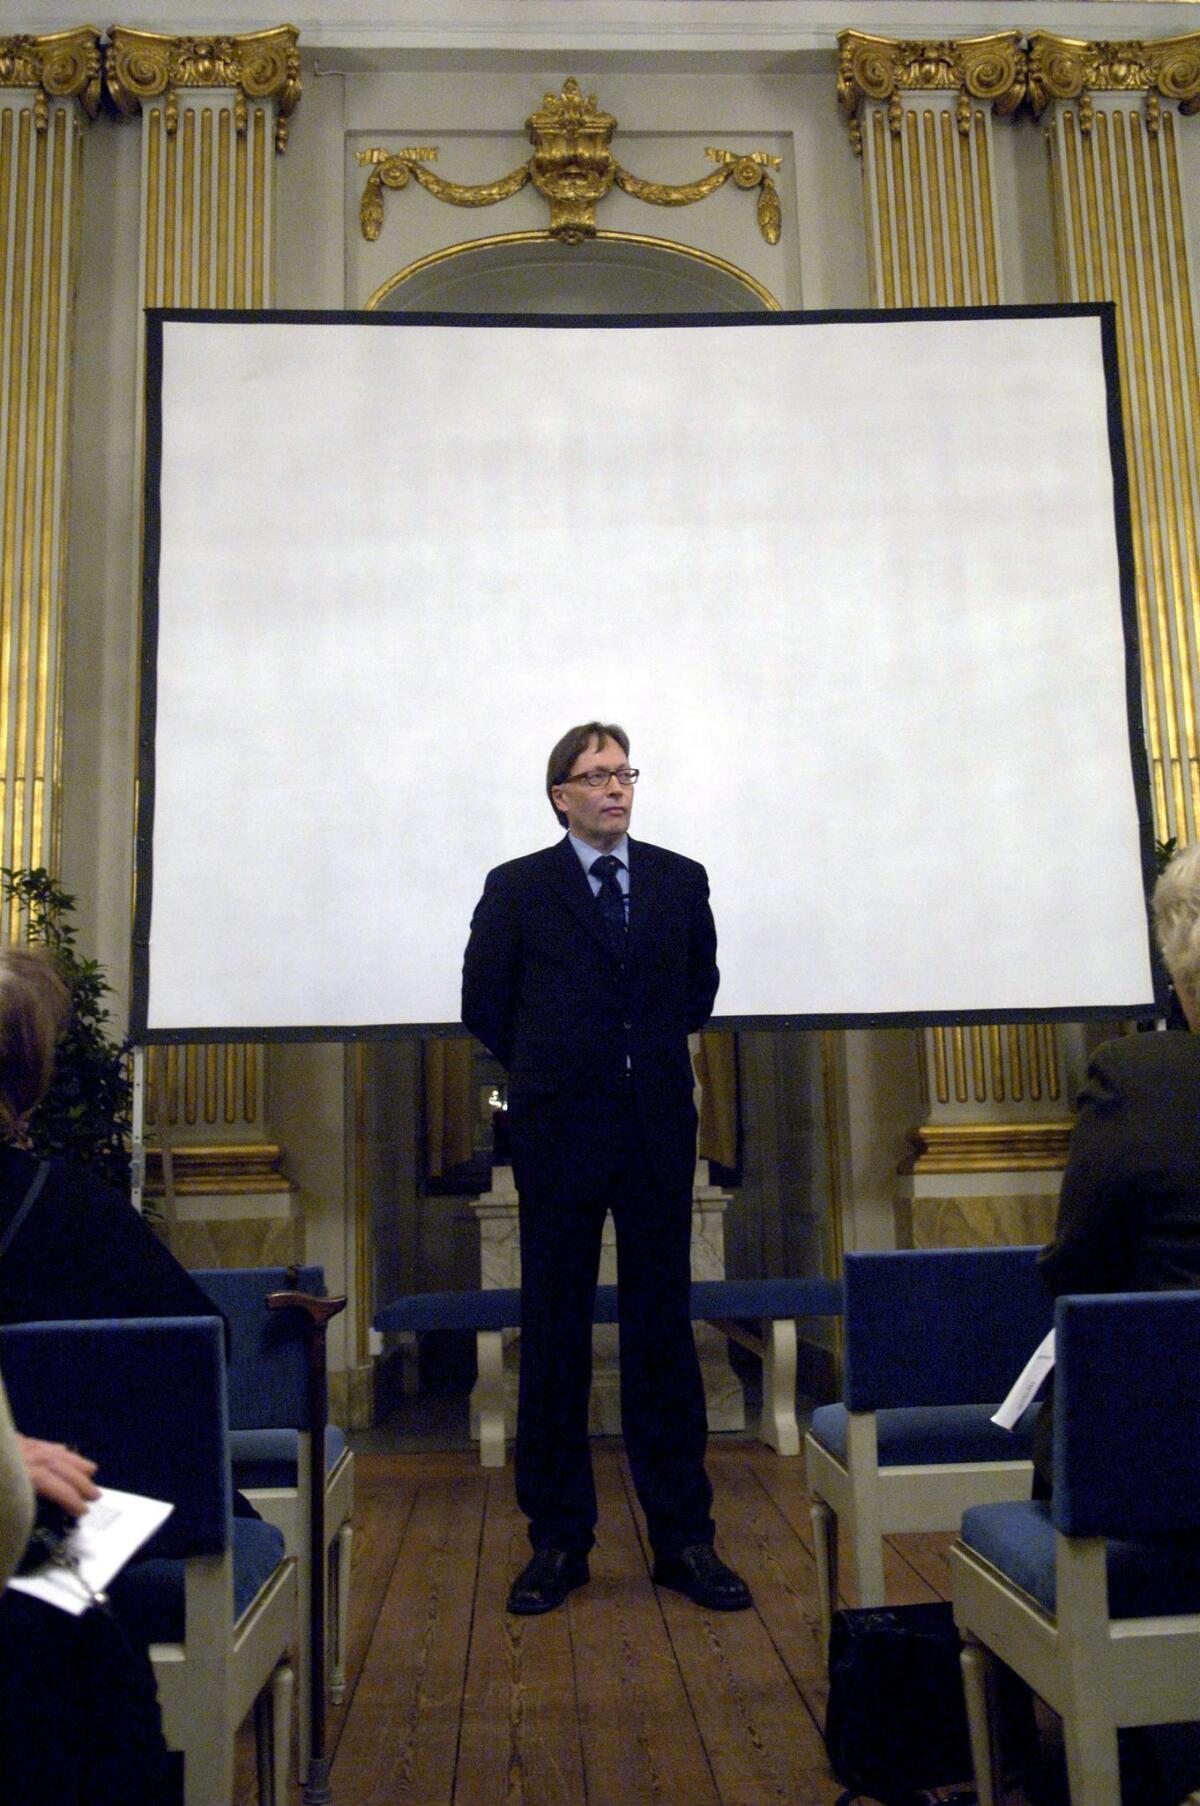 Horace Engdahl in 2005 as permanent secretary of the Swedish Academy, which awards the Nobel Prize.